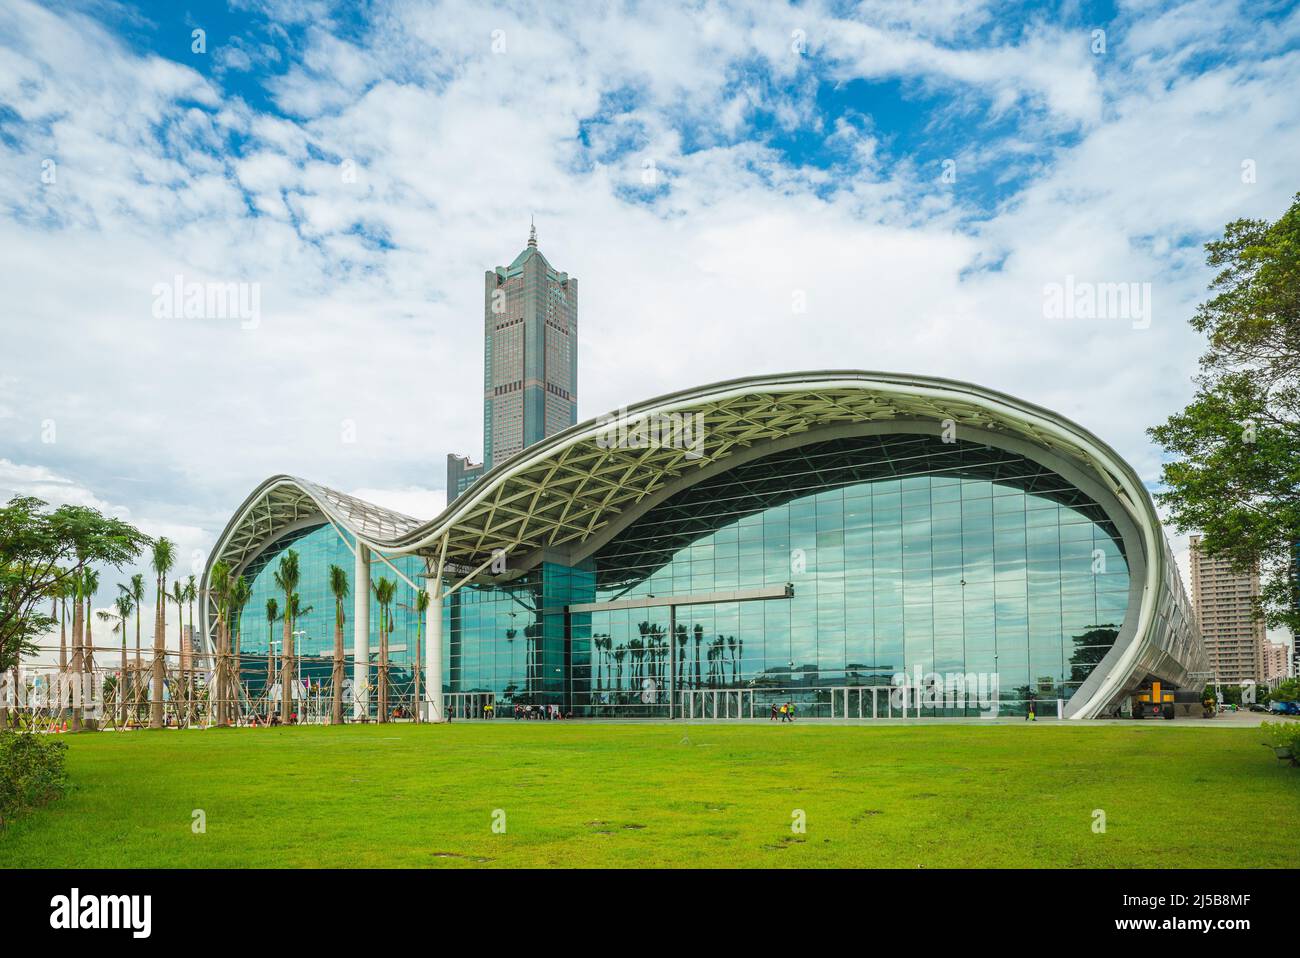 September 3, 2016: Kaohsiung Exhibition Center and Tuntex Sky Tower in Cianjhen district of kaohsiung city, taiwan. The exhibition center is designed Stock Photo